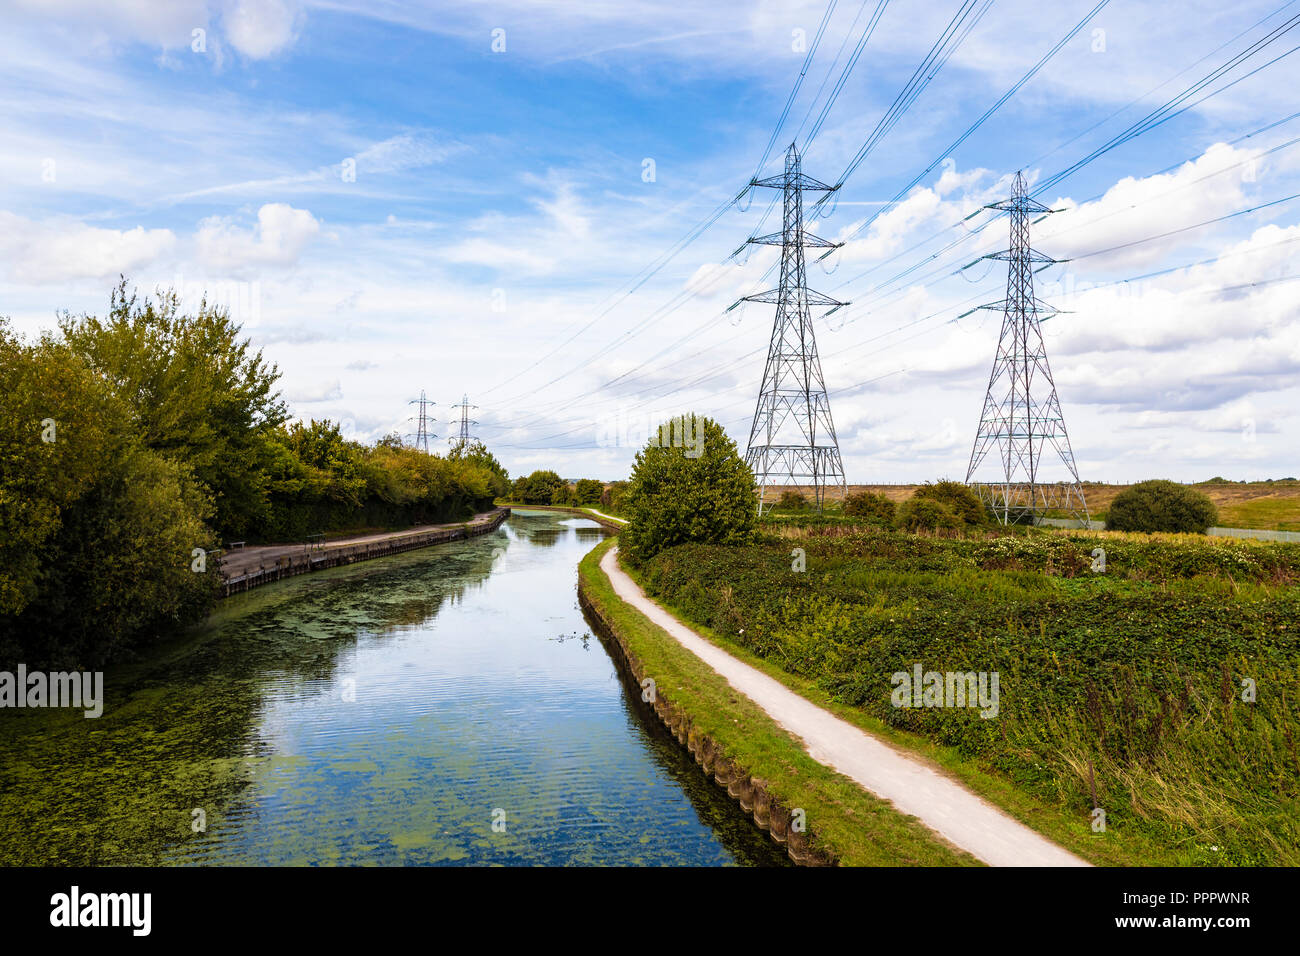 London, United Kingdom - September 15, 2018: View of the path alongside the river Thames in the Lea Valley Walk. Stock Photo